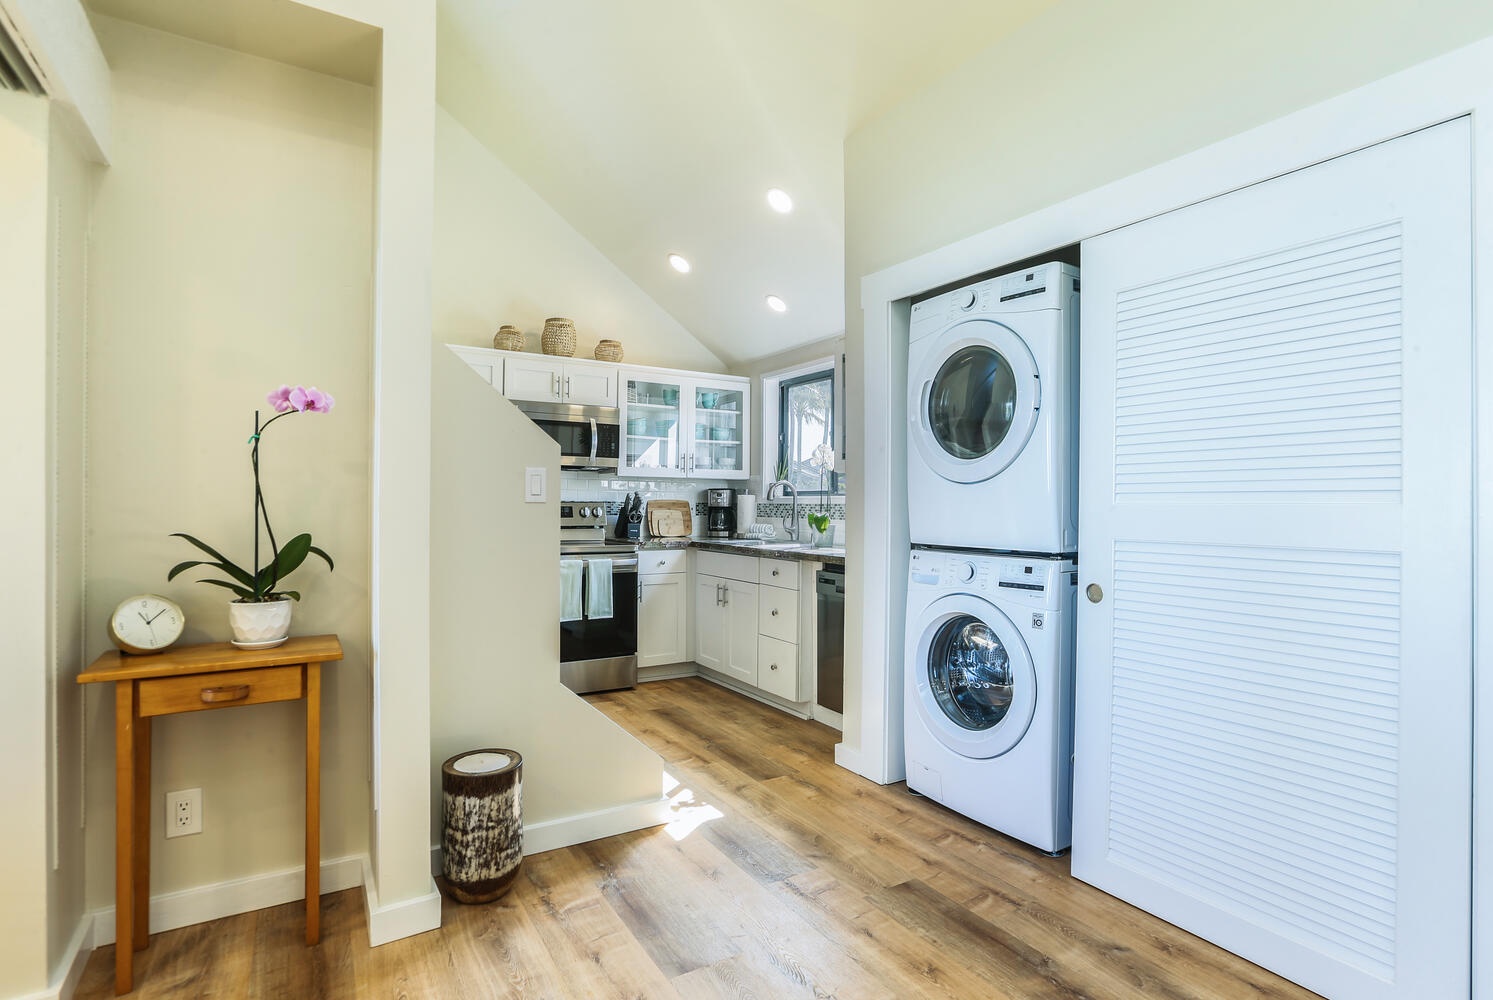 Princeville Vacation Rentals, Sealodge J8 - There's also a washer and dryer in-unit, just off the kitchen